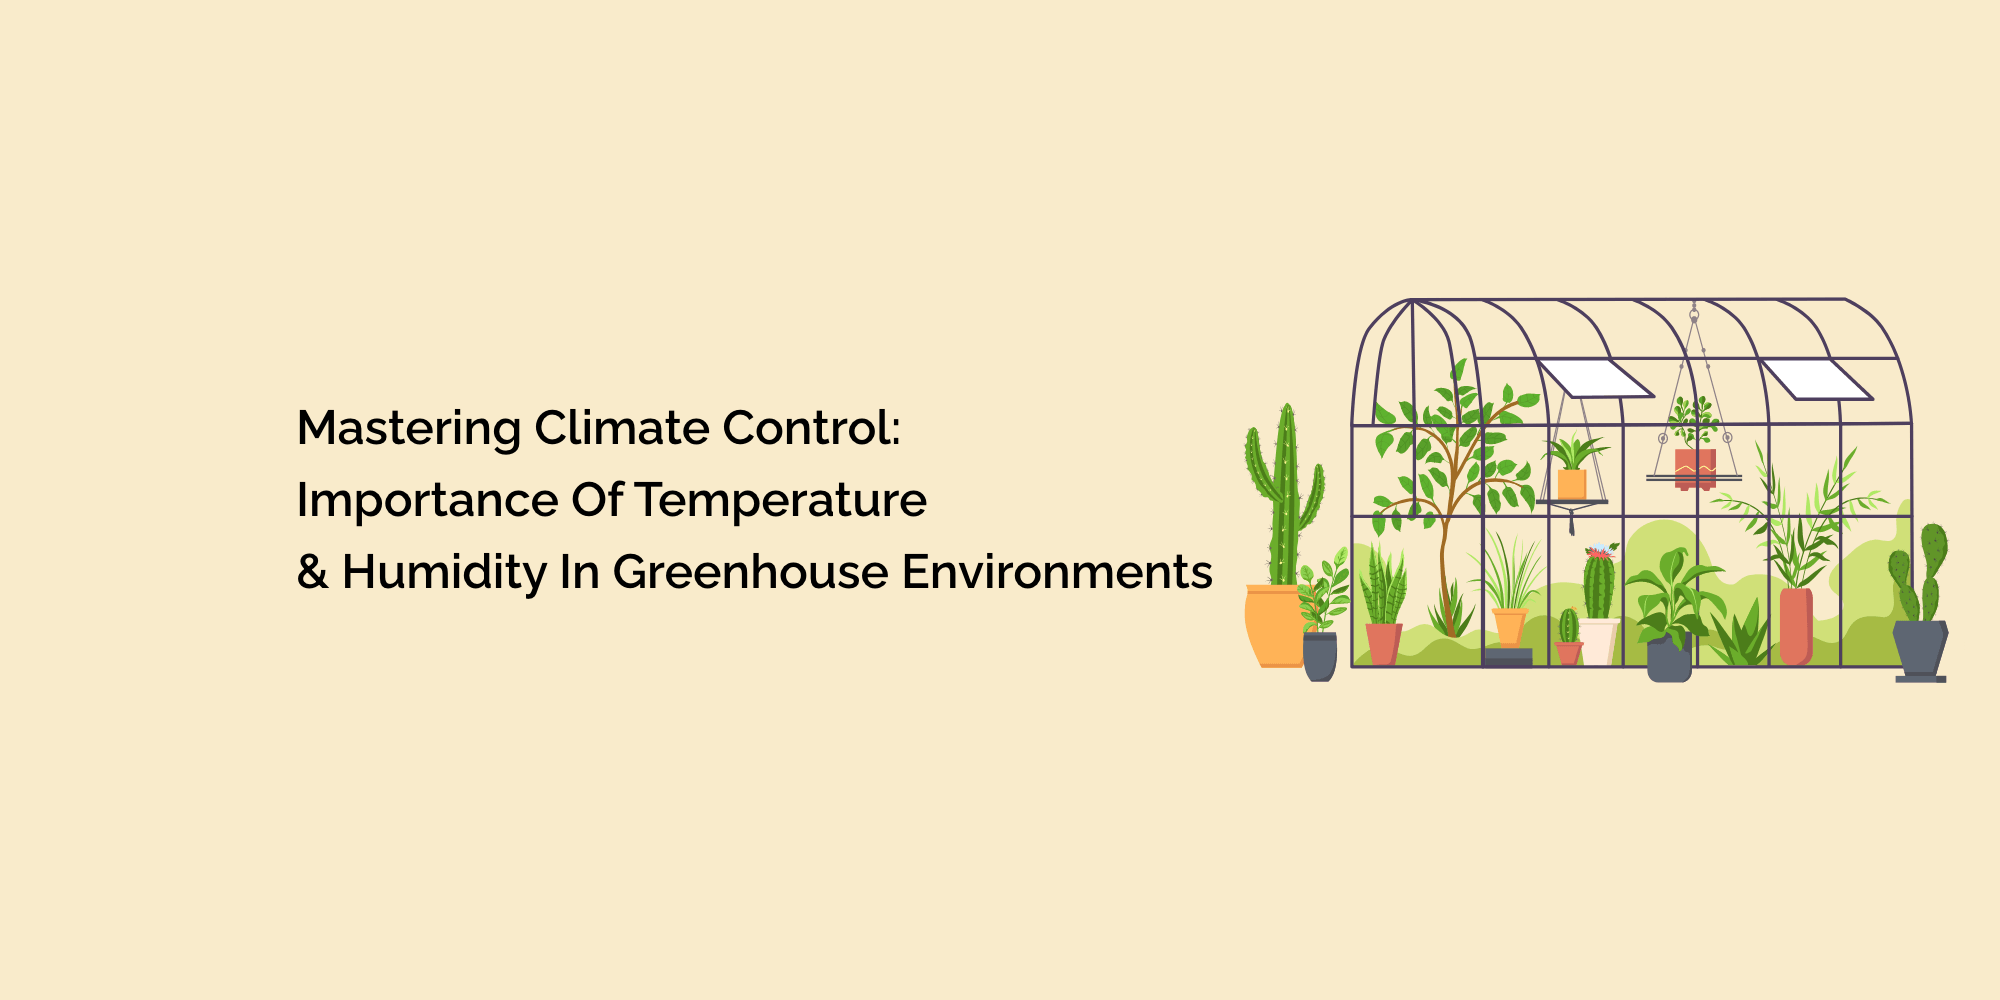 Mastering Climate Control: Importance of Temperature and Humidity in Greenhouse Environments